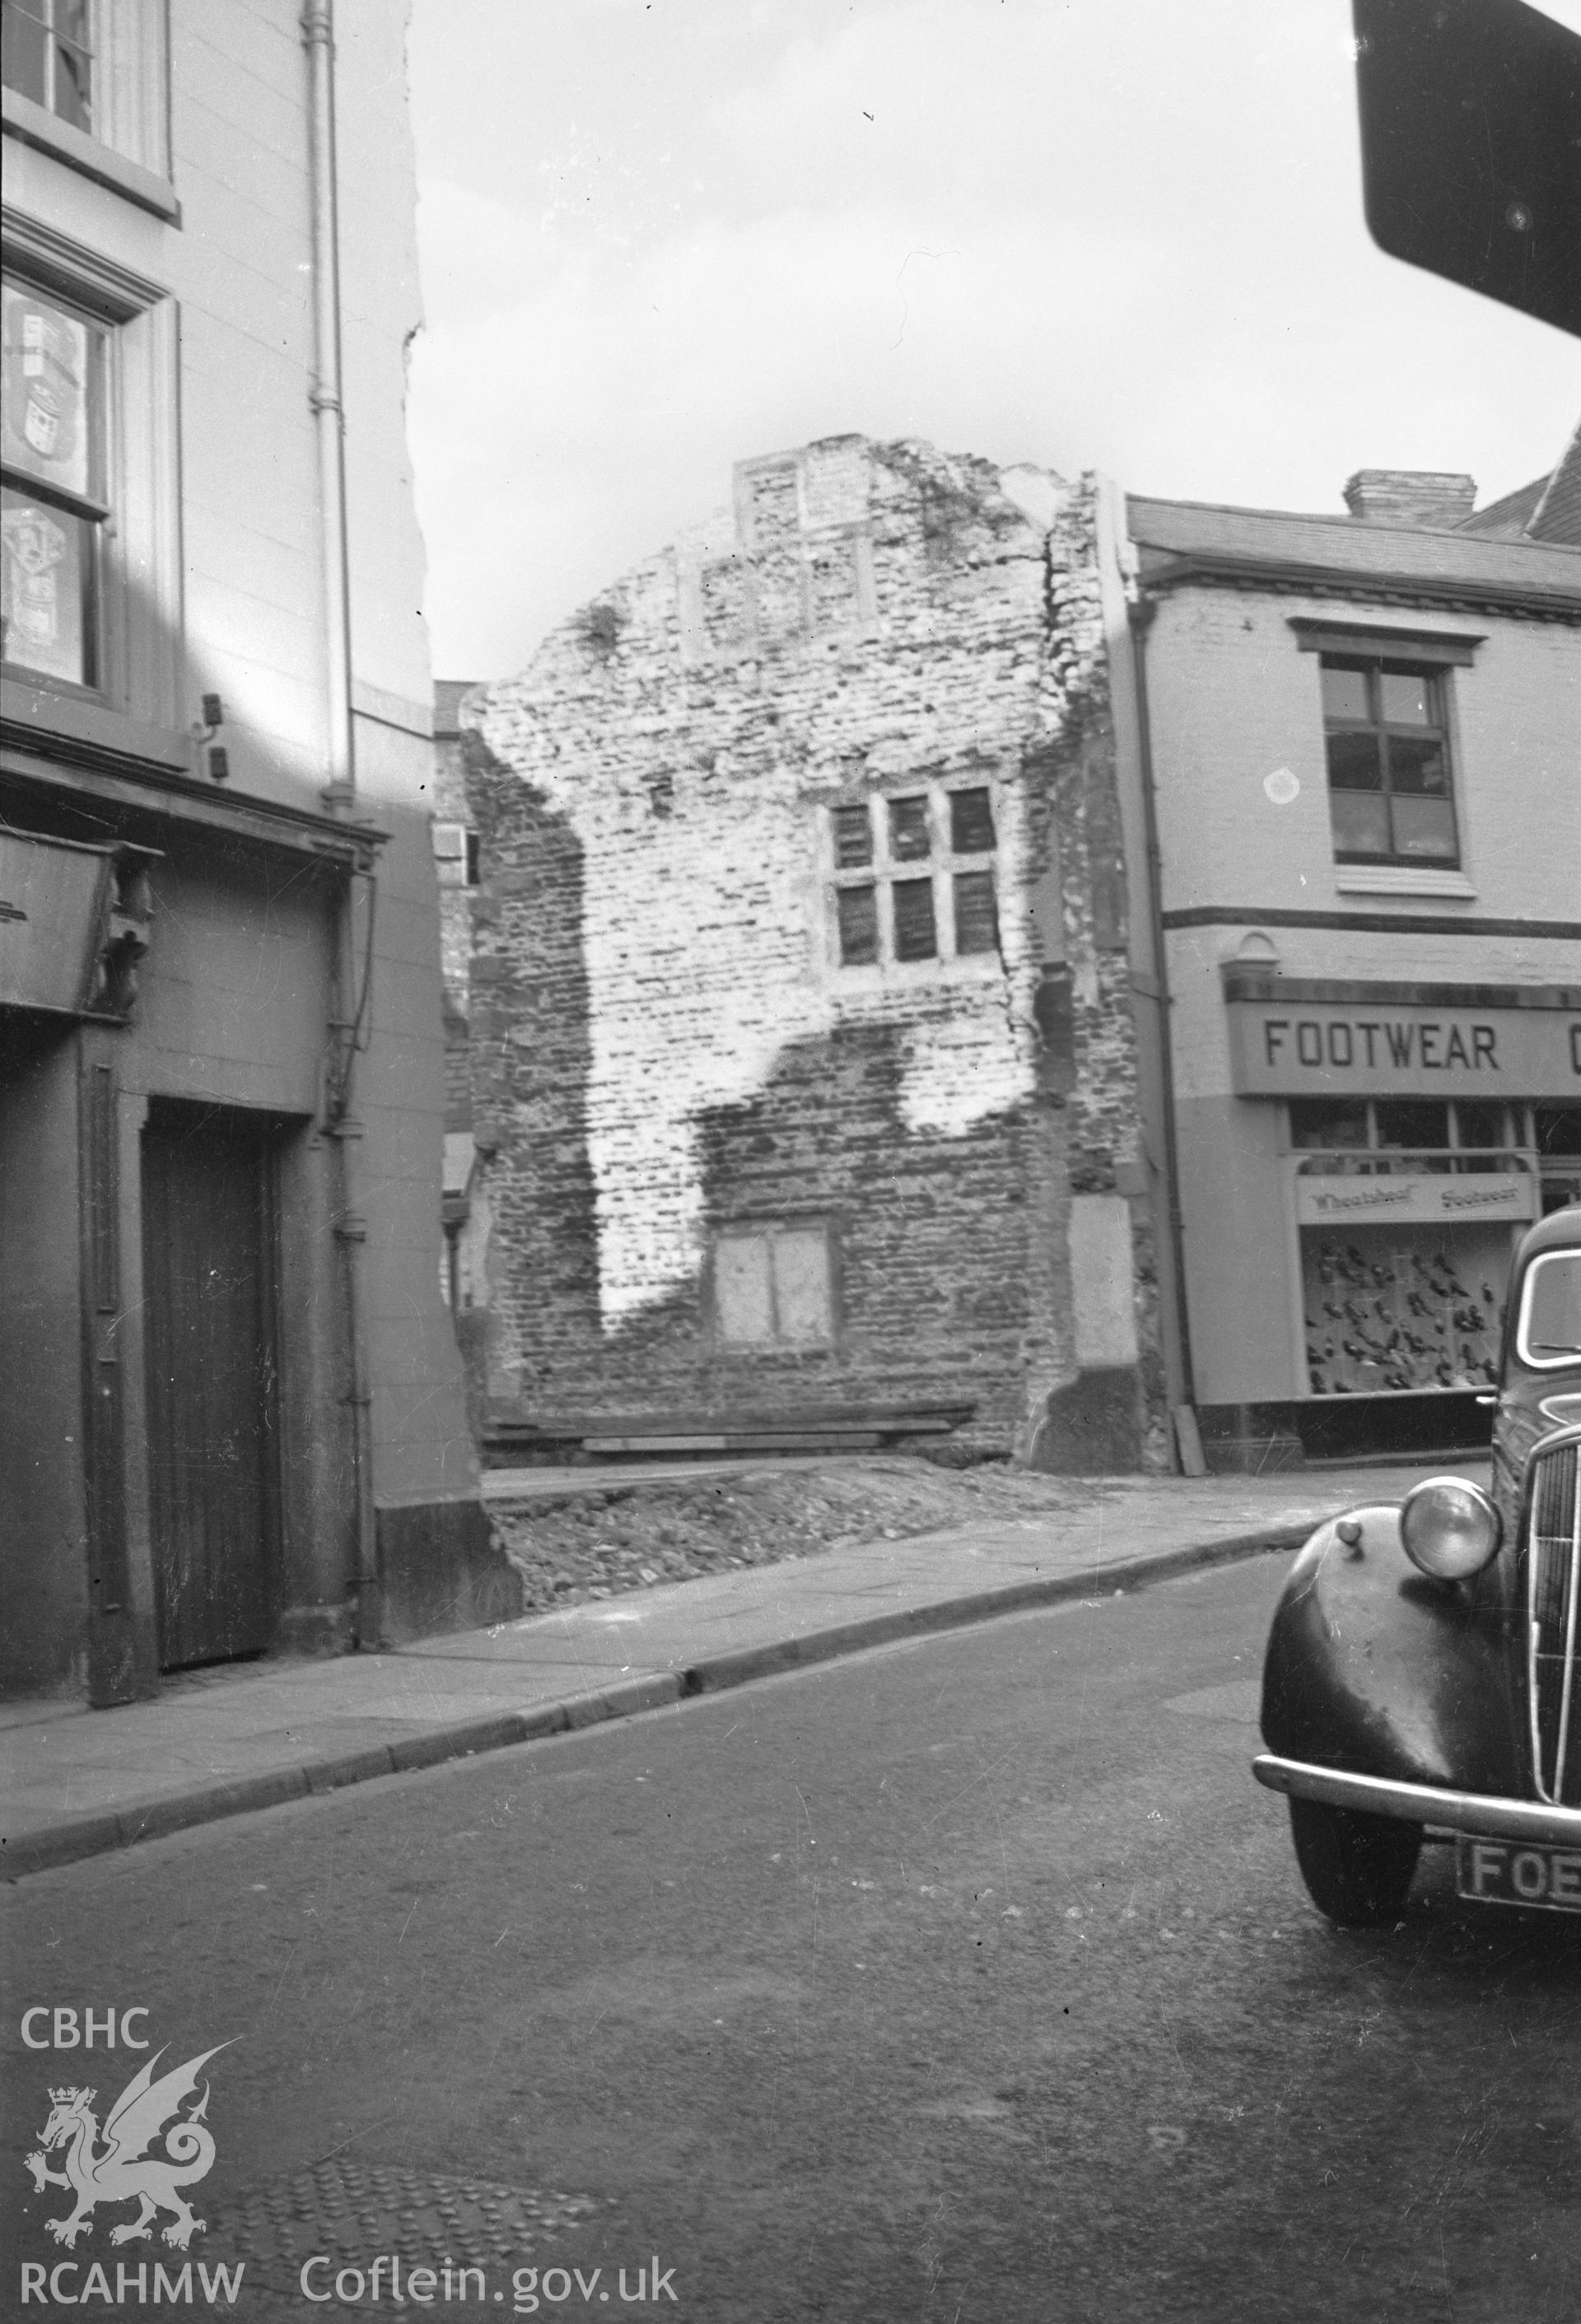 Digital copy of a nitrate negative showing street view in Wrexham wiht demolished building, taken by RCAHMW.